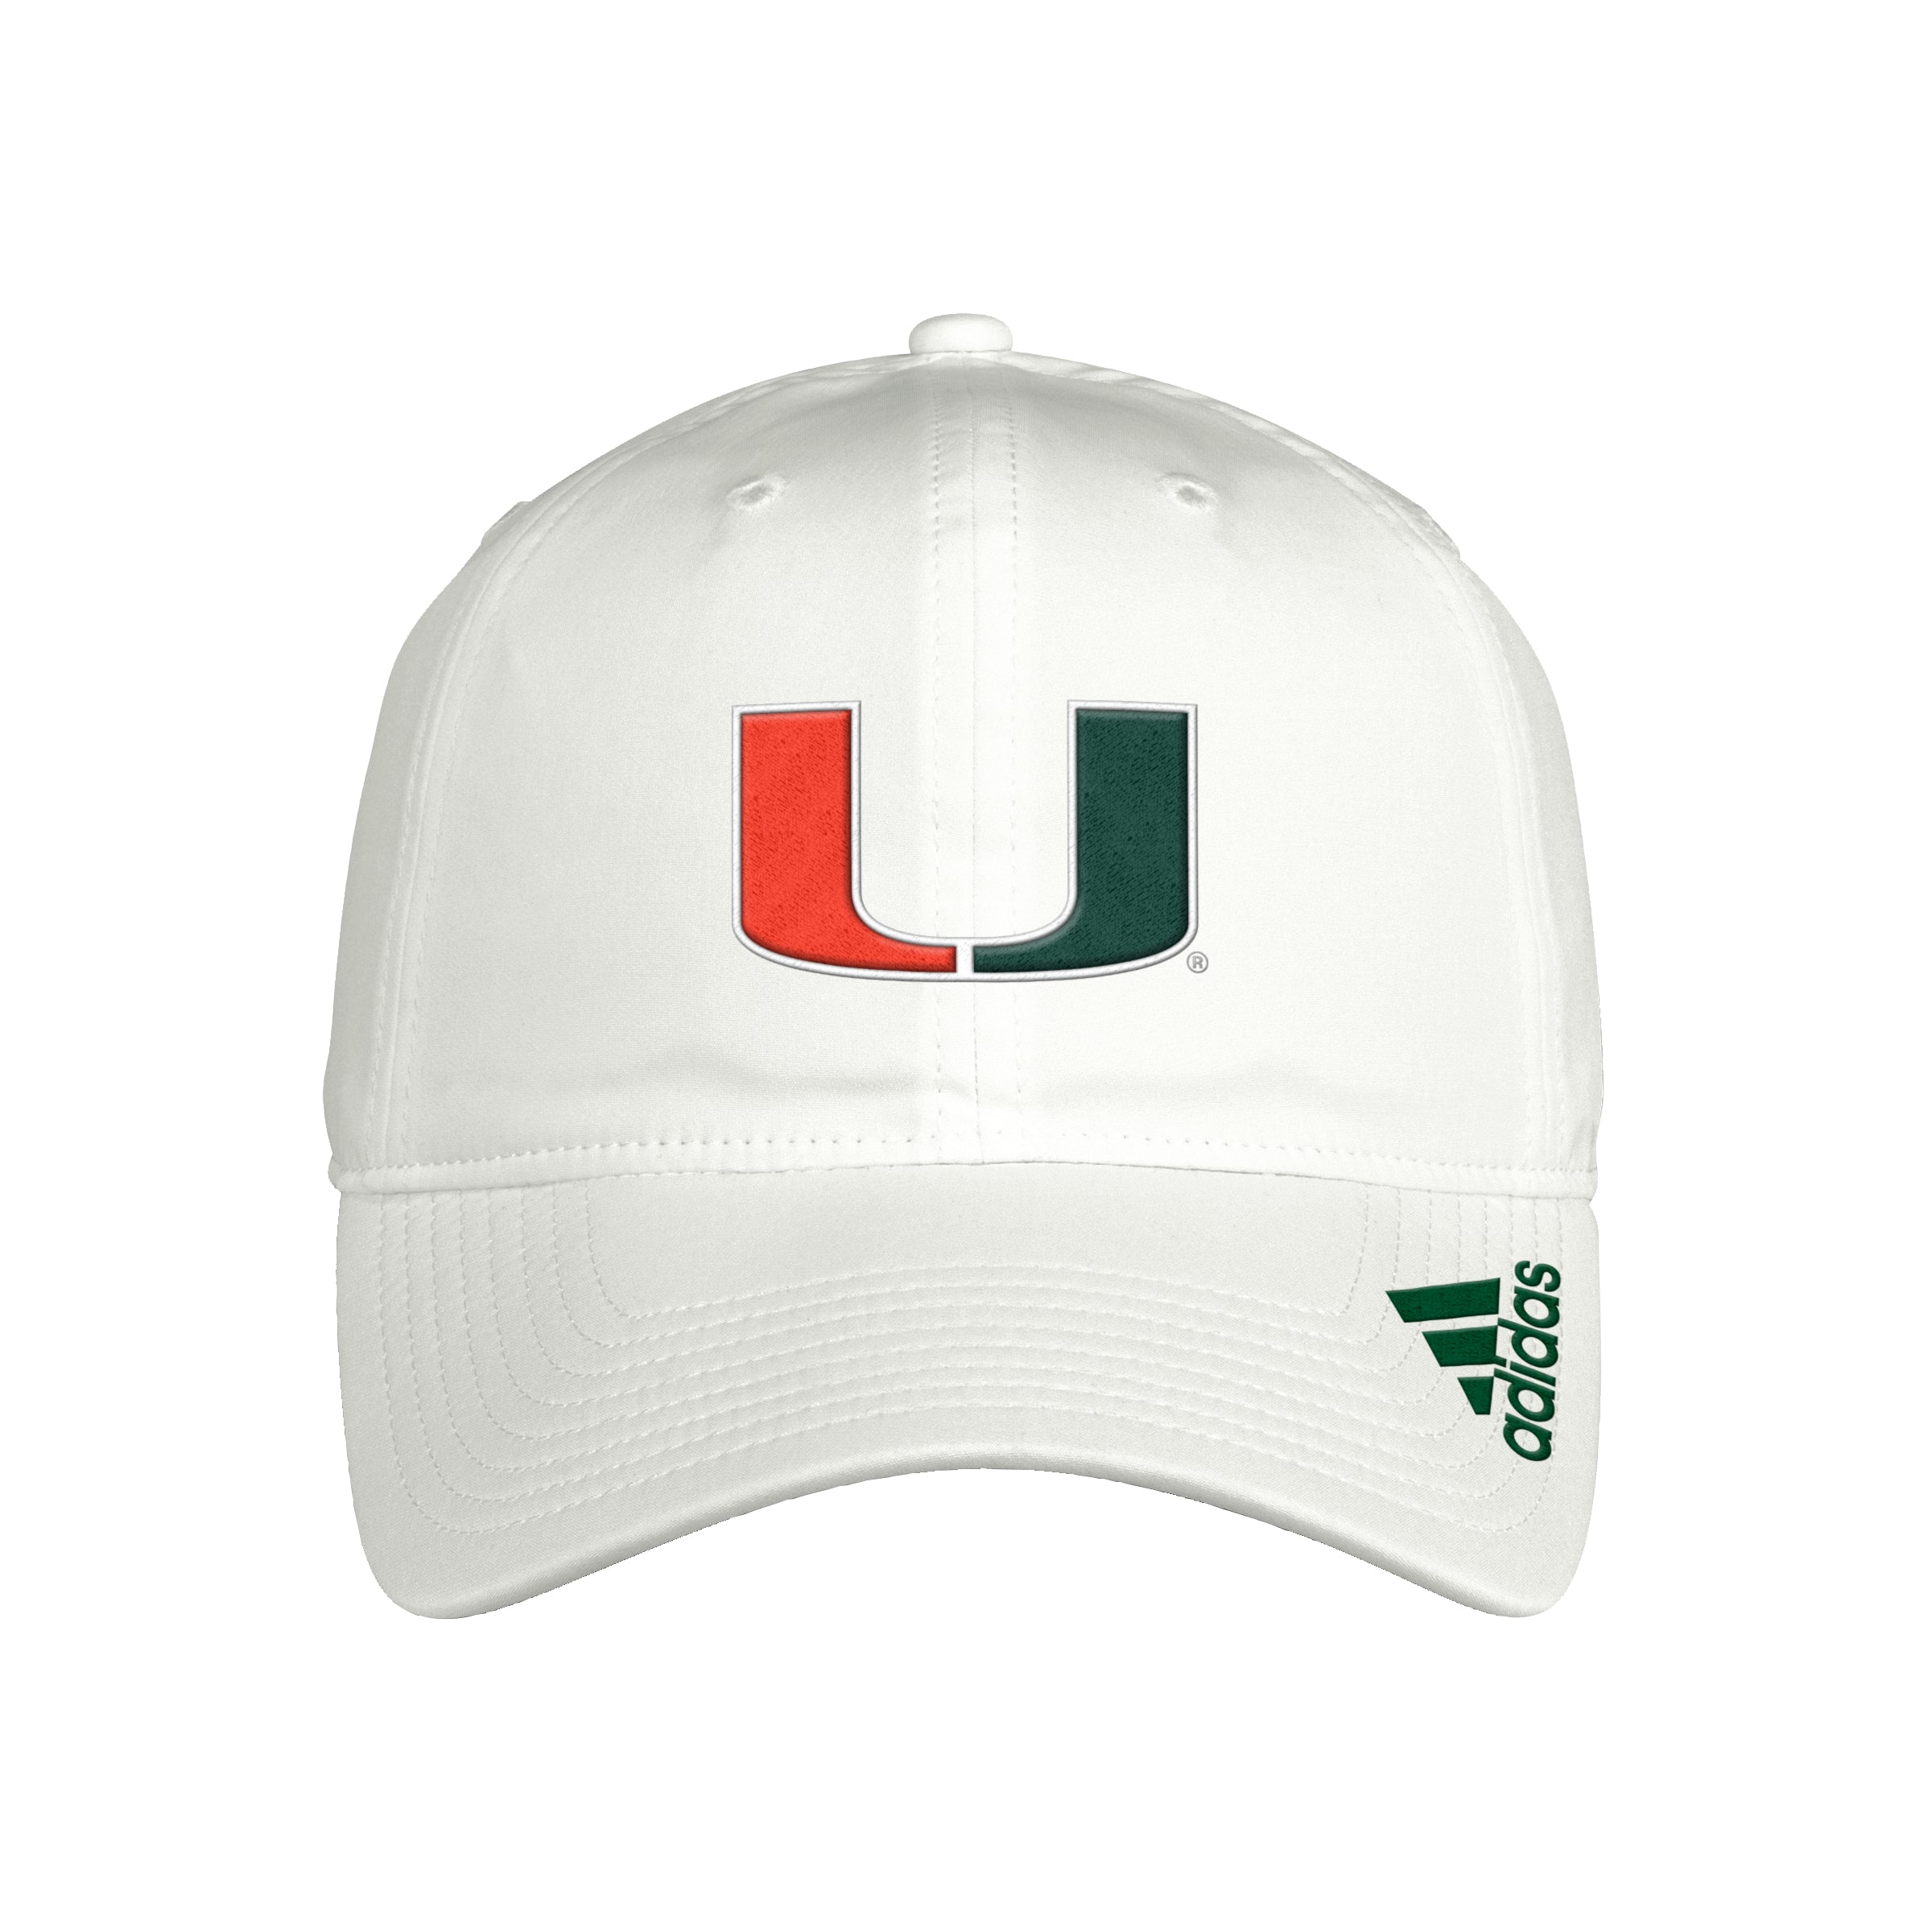 Miami Hurricanes adidas Coaches Slouch Adjustable Hat - White